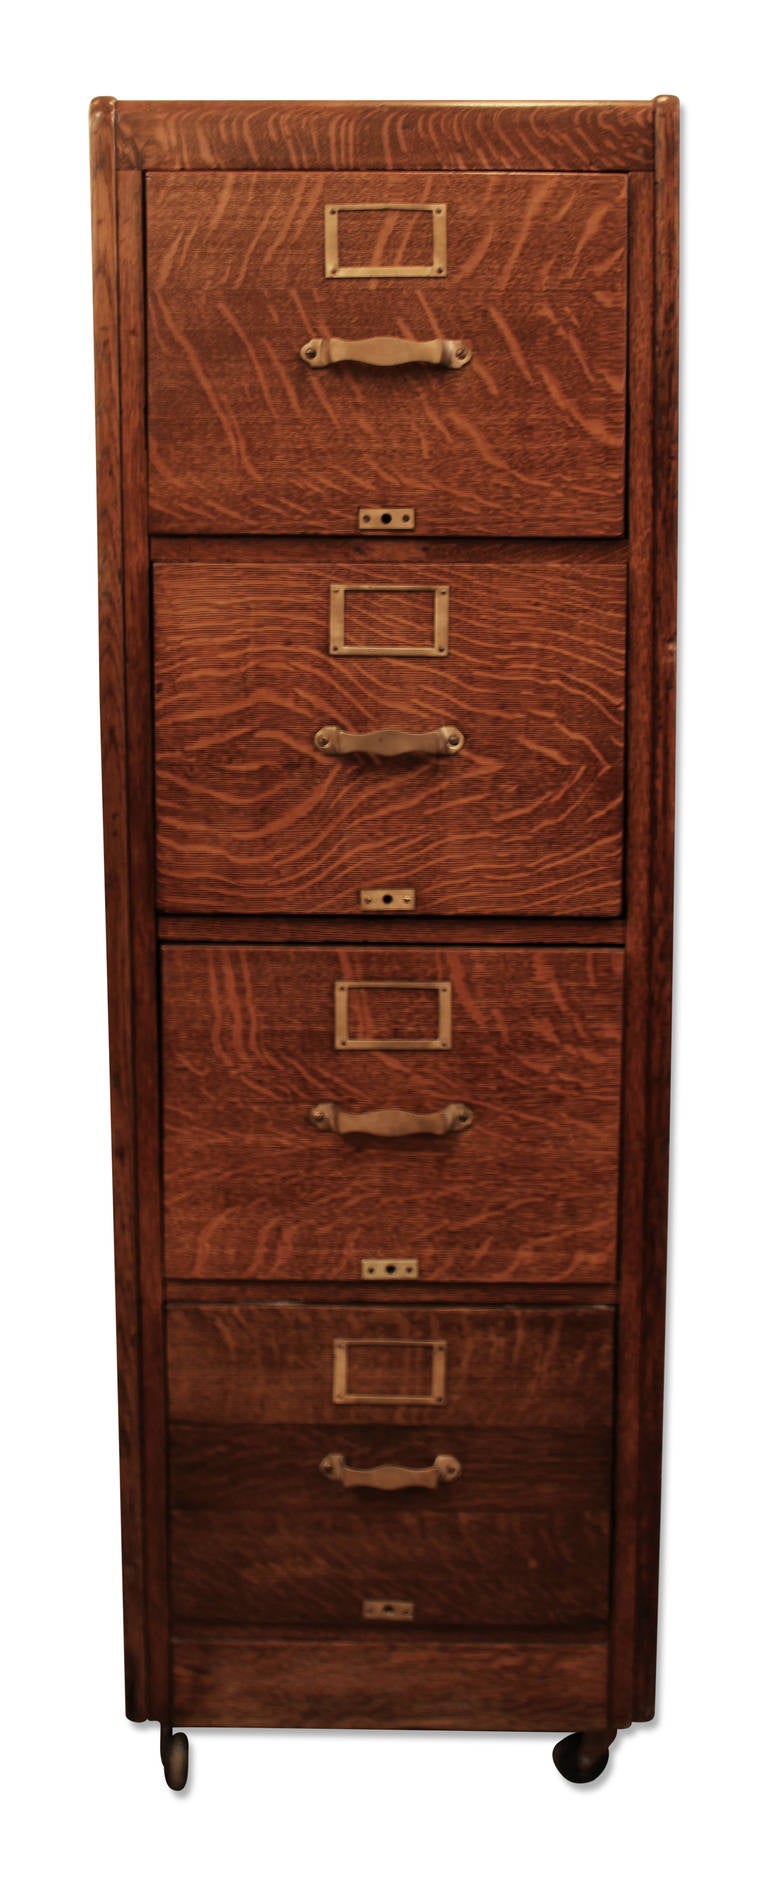 Mid-20th Century Tiger Oak Four Drawer File Cabinet with Original Hardware